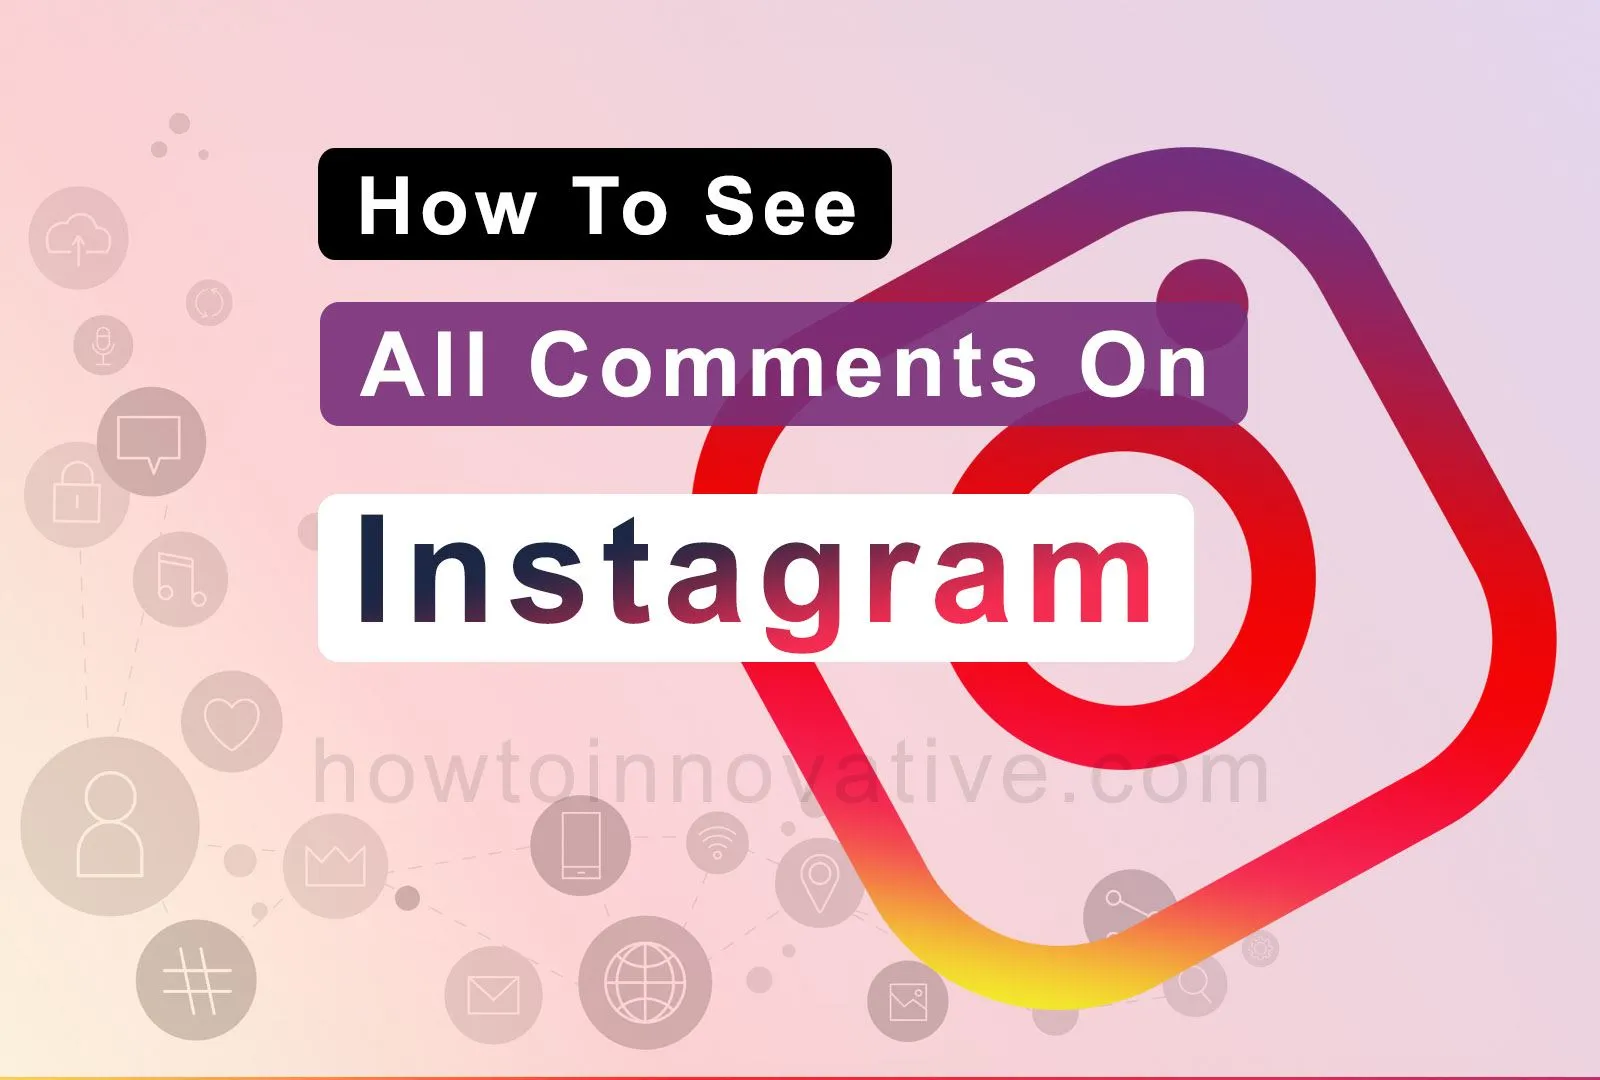 How To See All Comments On Instagram